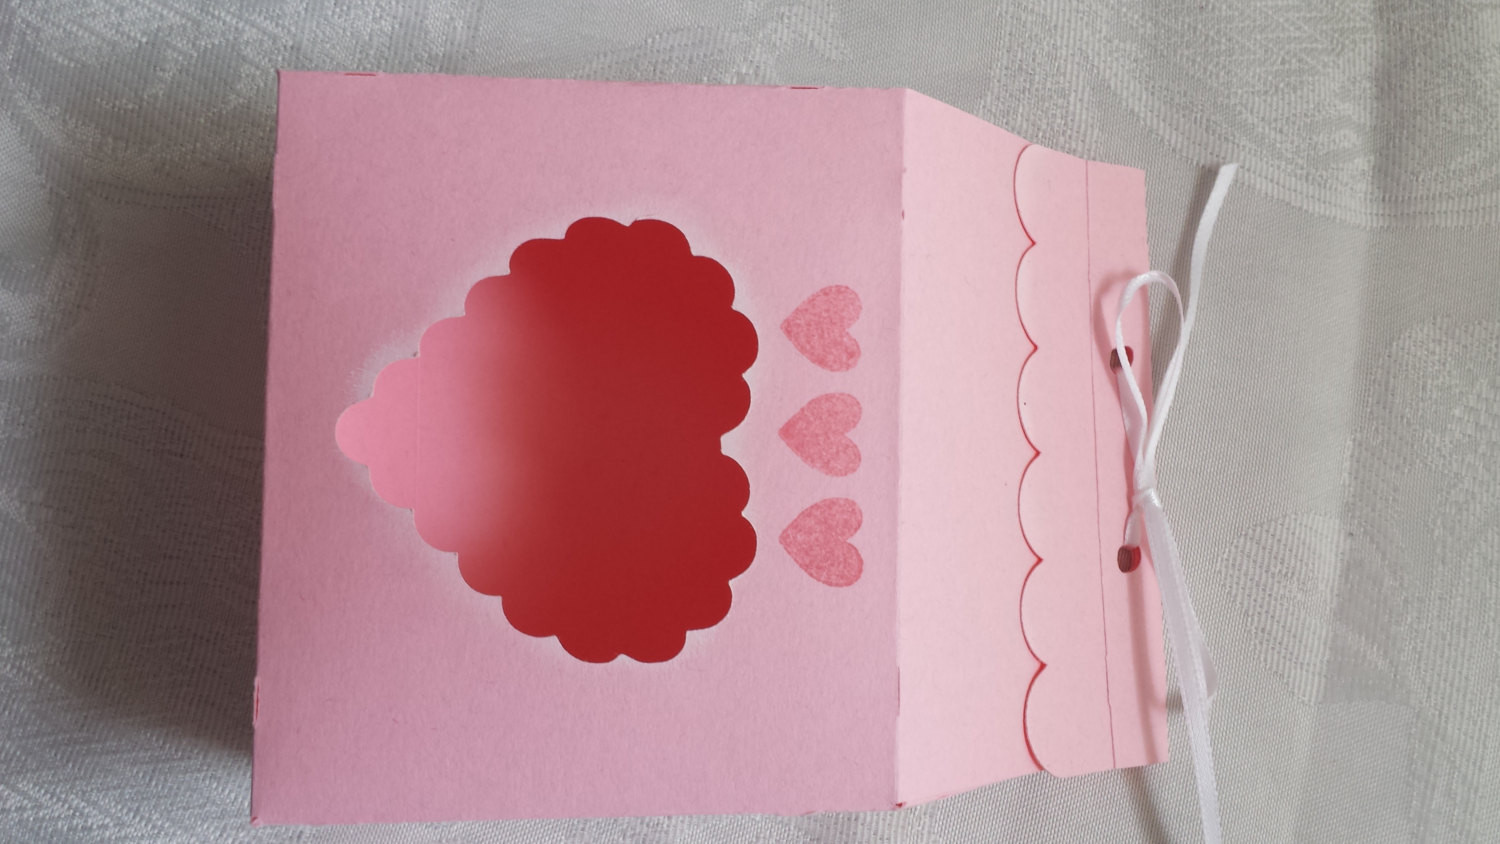 Valentines Day Gift Box Ideas
 18 Cute Little Gift Box Ideas for Valentine s Day